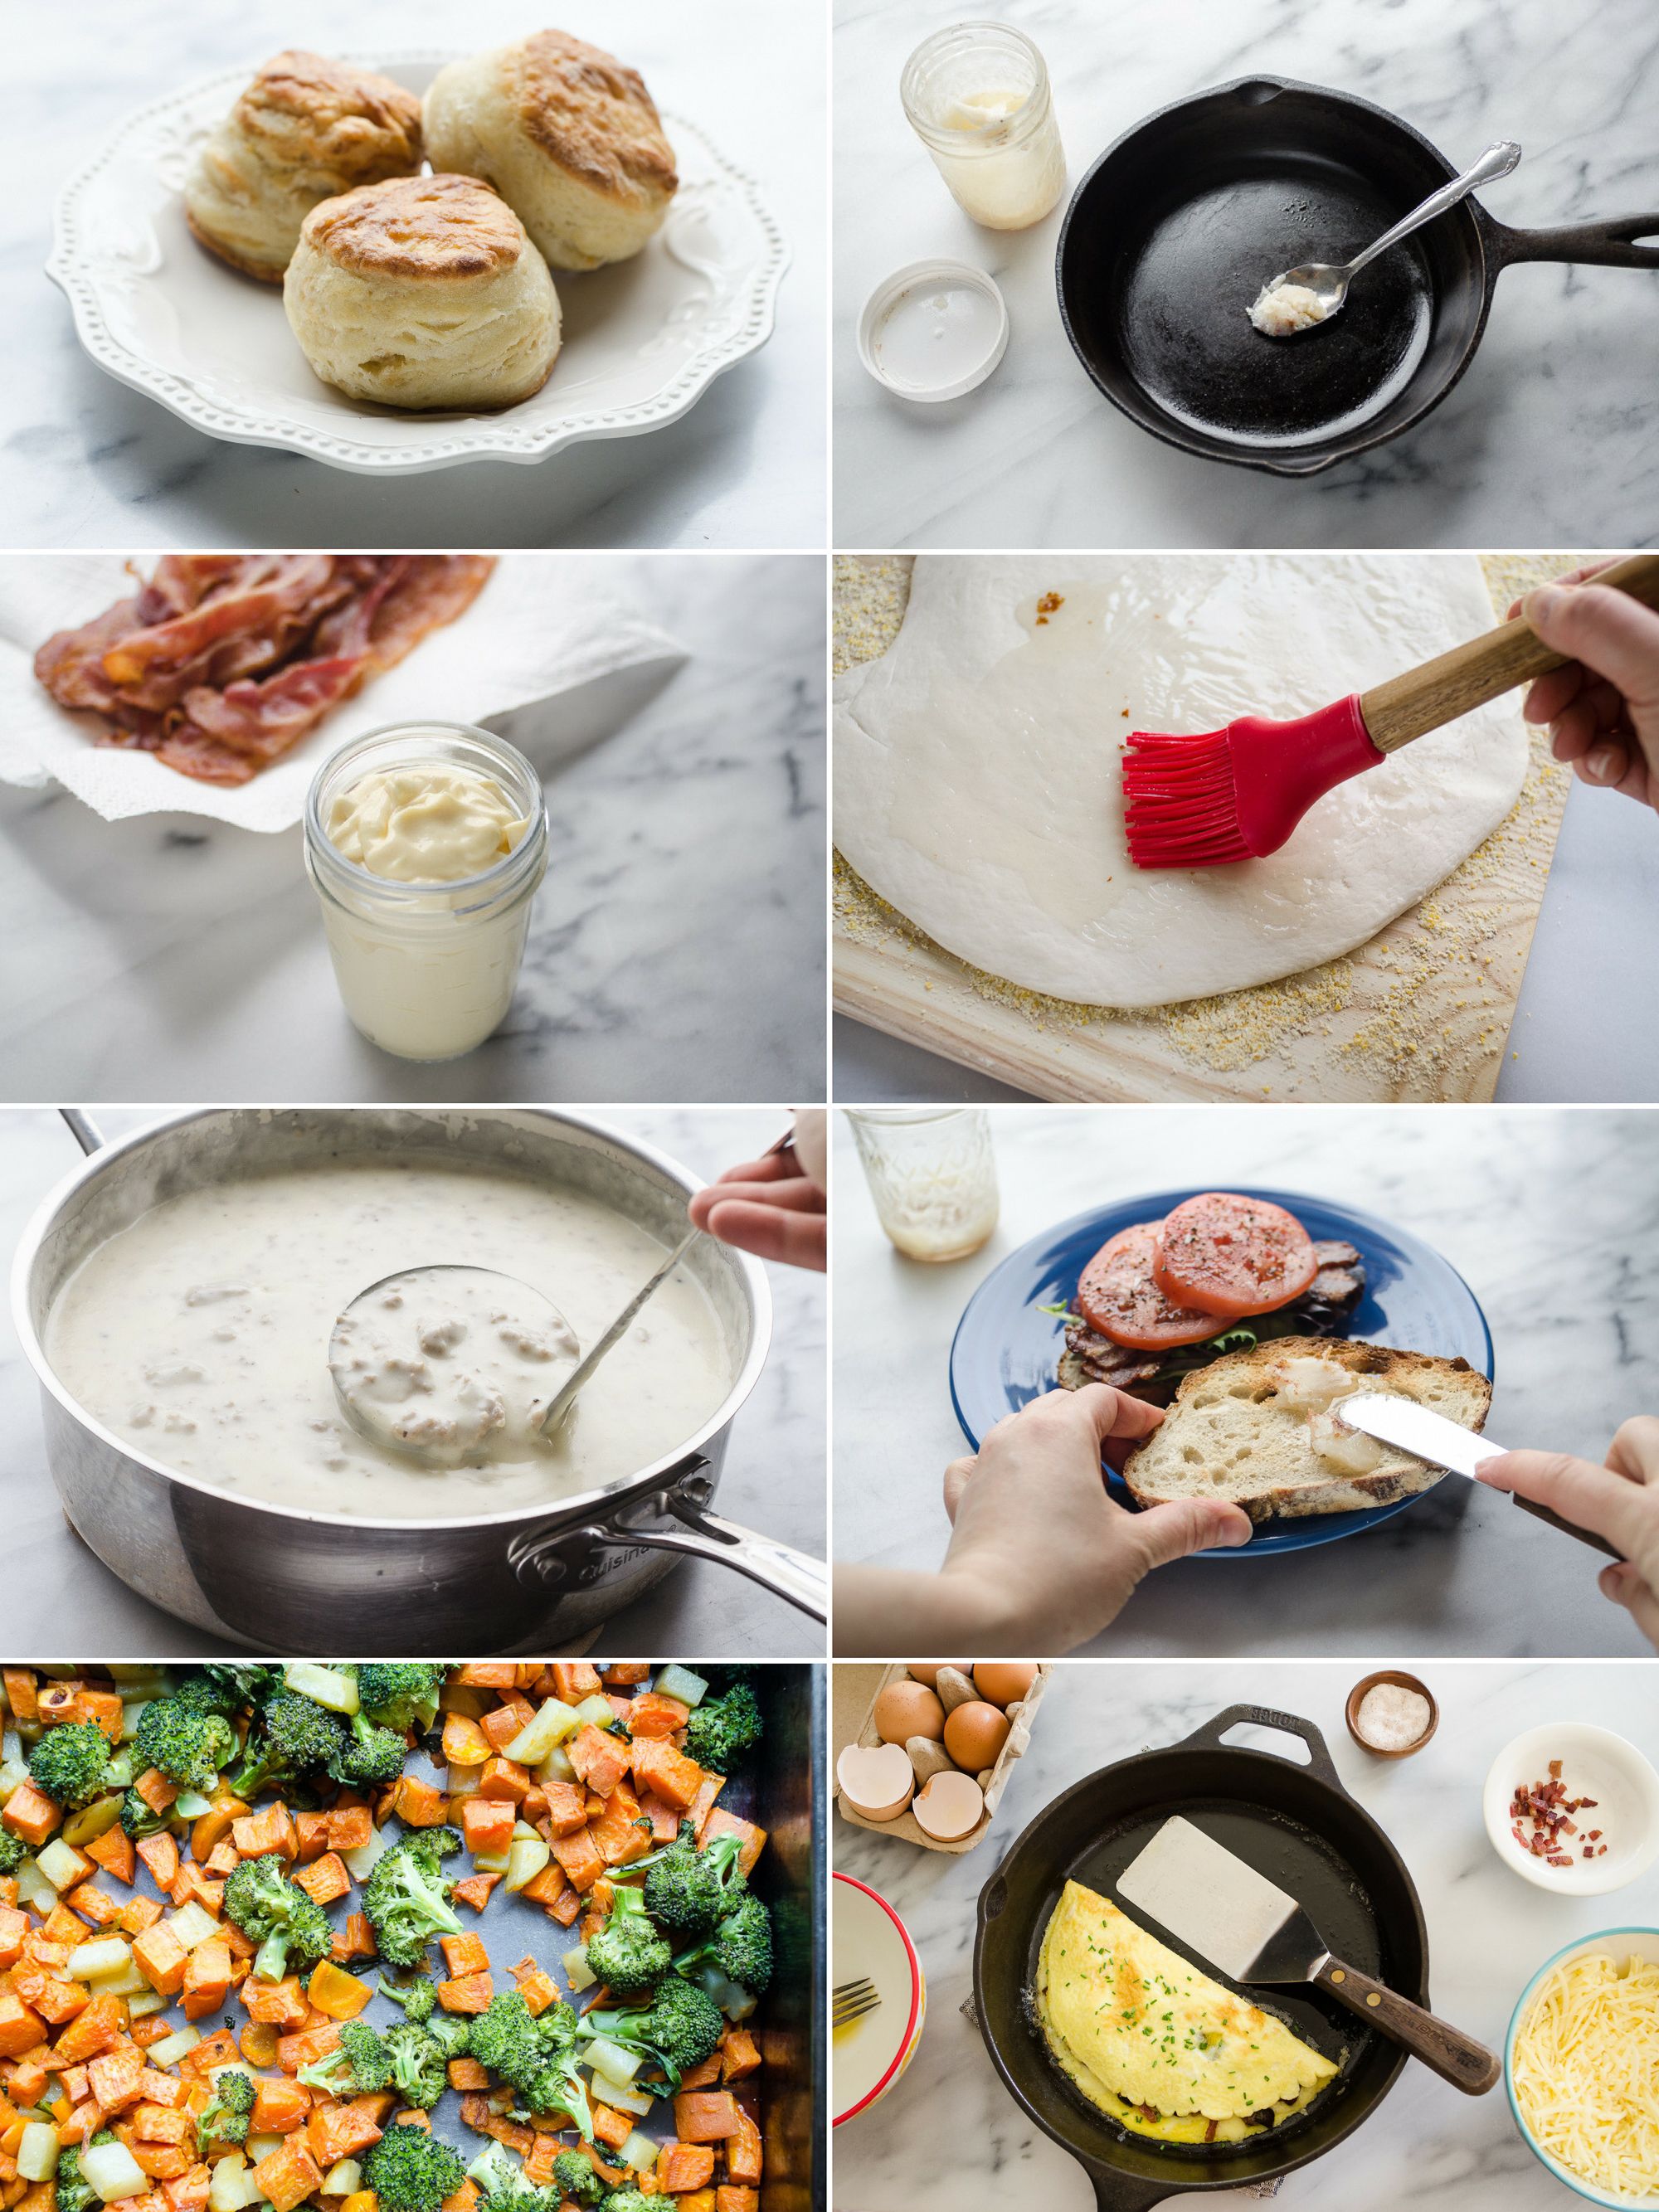 https://hips.hearstapps.com/thepioneerwoman/wp-content/uploads/2019/03/20-Ways-to-Use-Up-Bacon-Grease-17.jpg